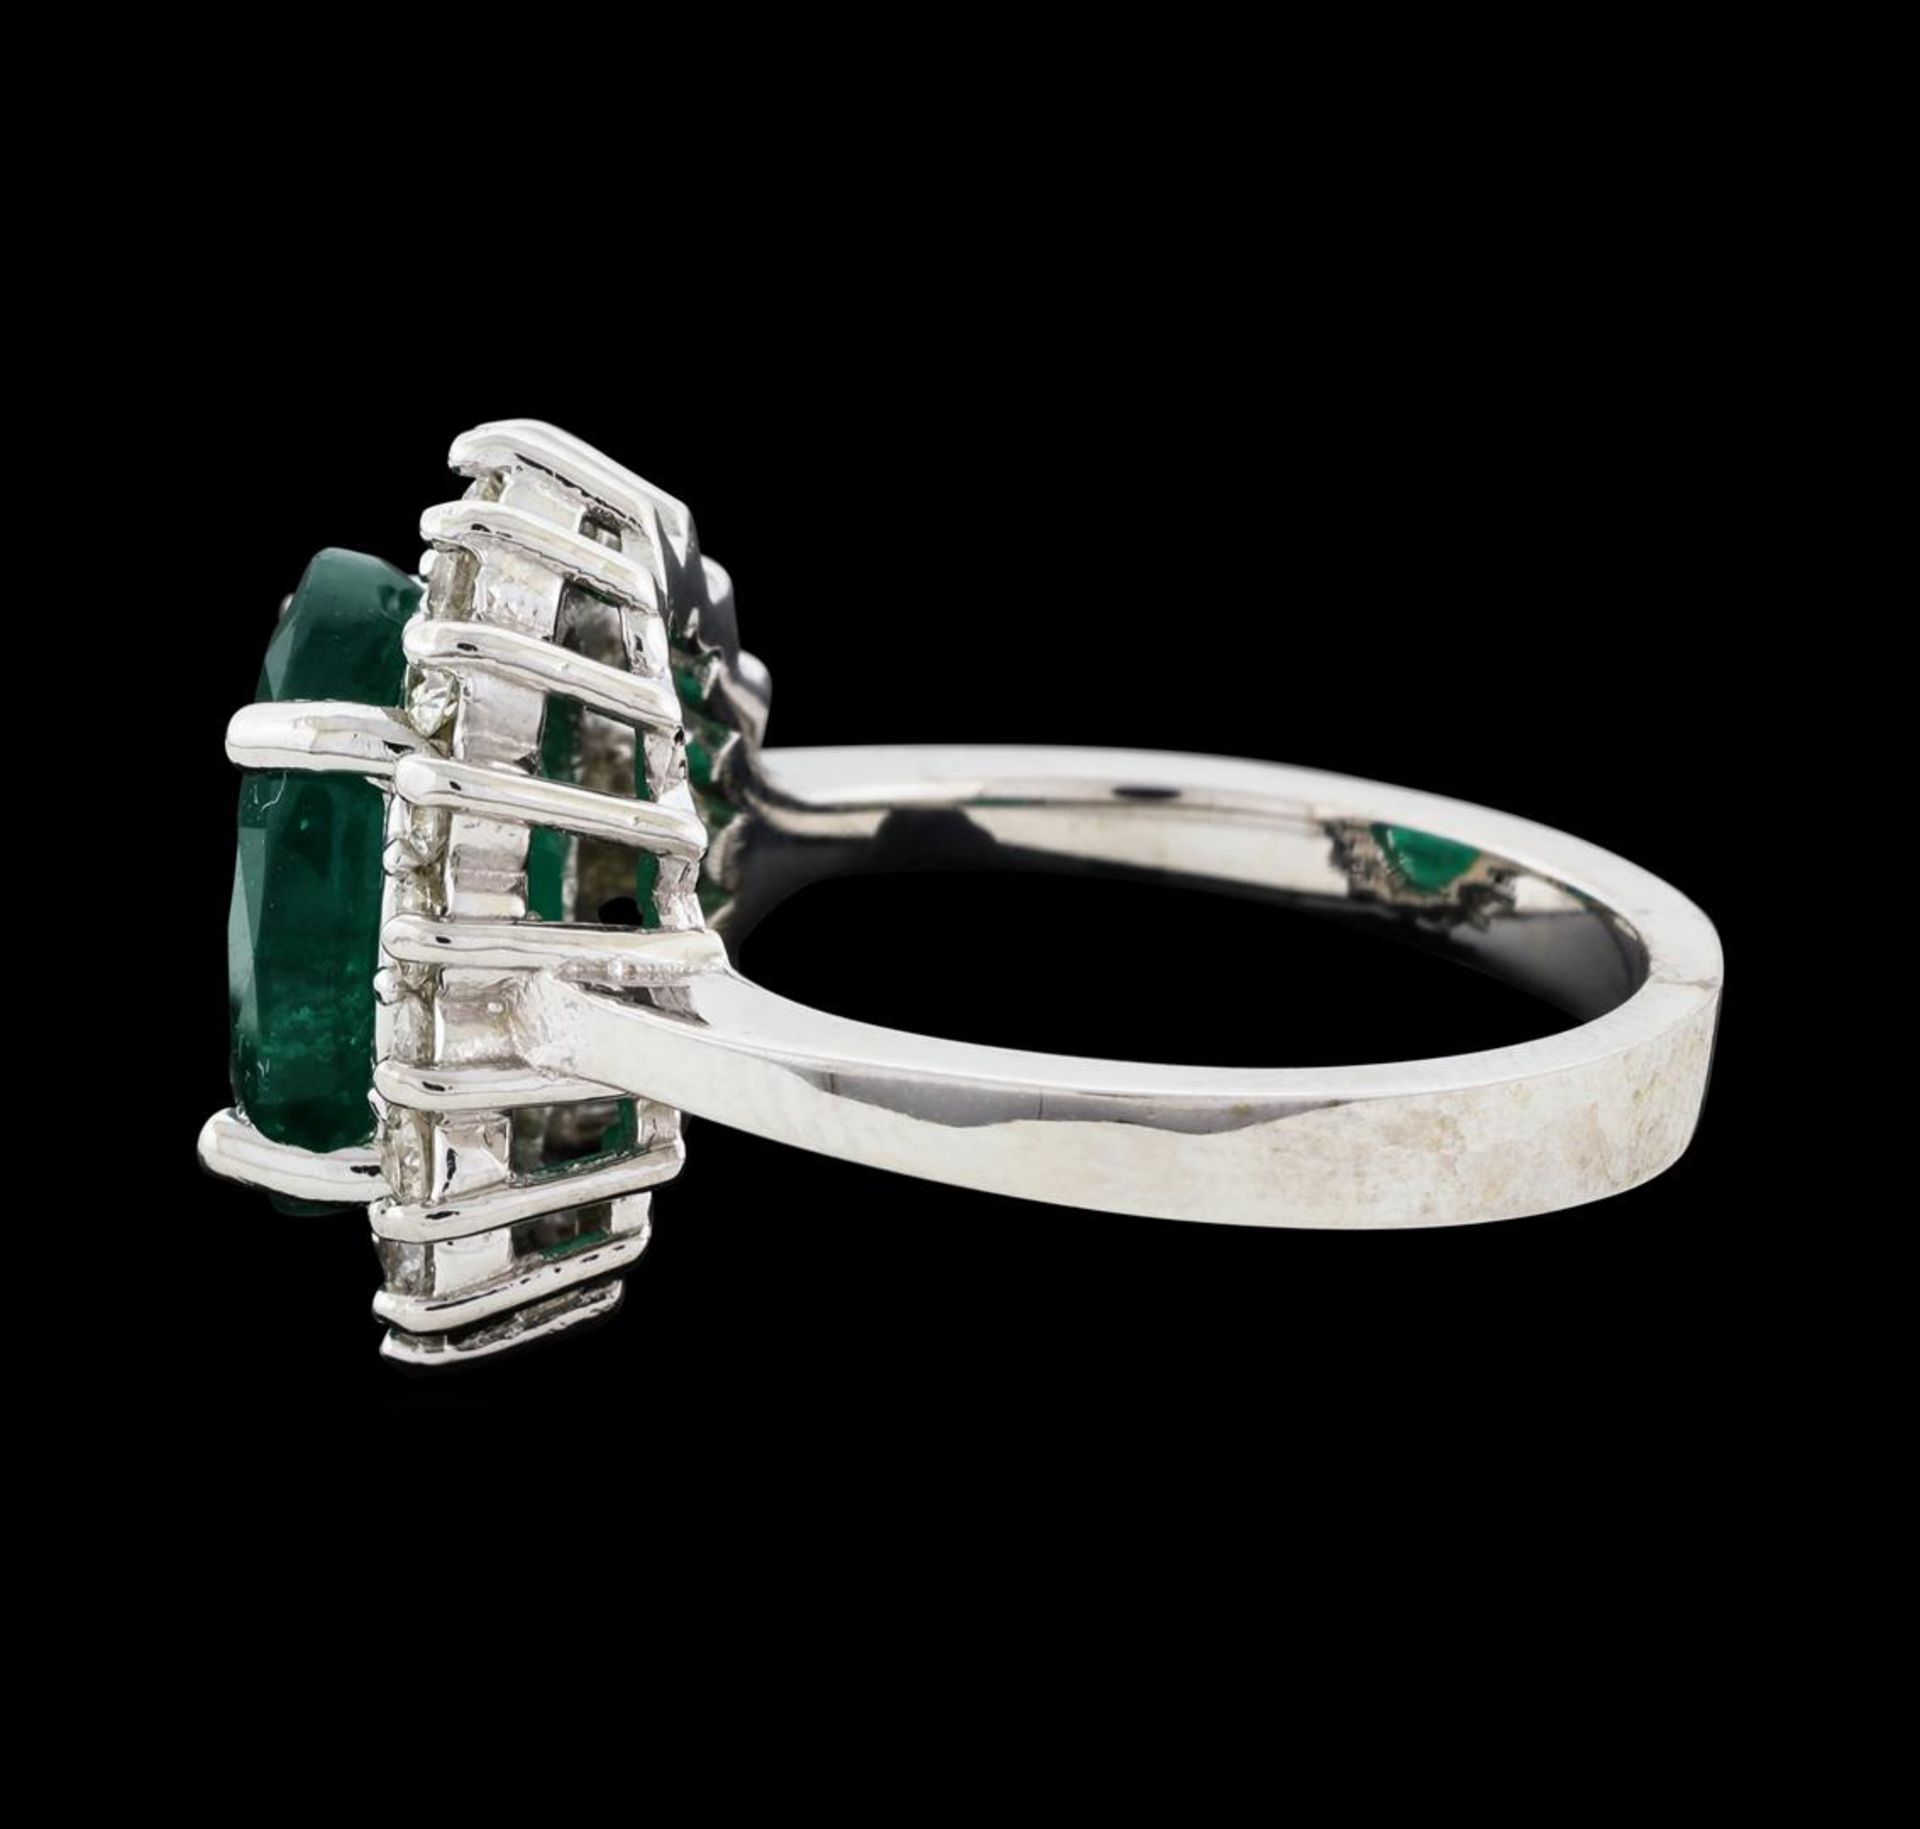 3.85 ctw Emerald and Diamond Ring - 14KT White Gold - Image 3 of 5